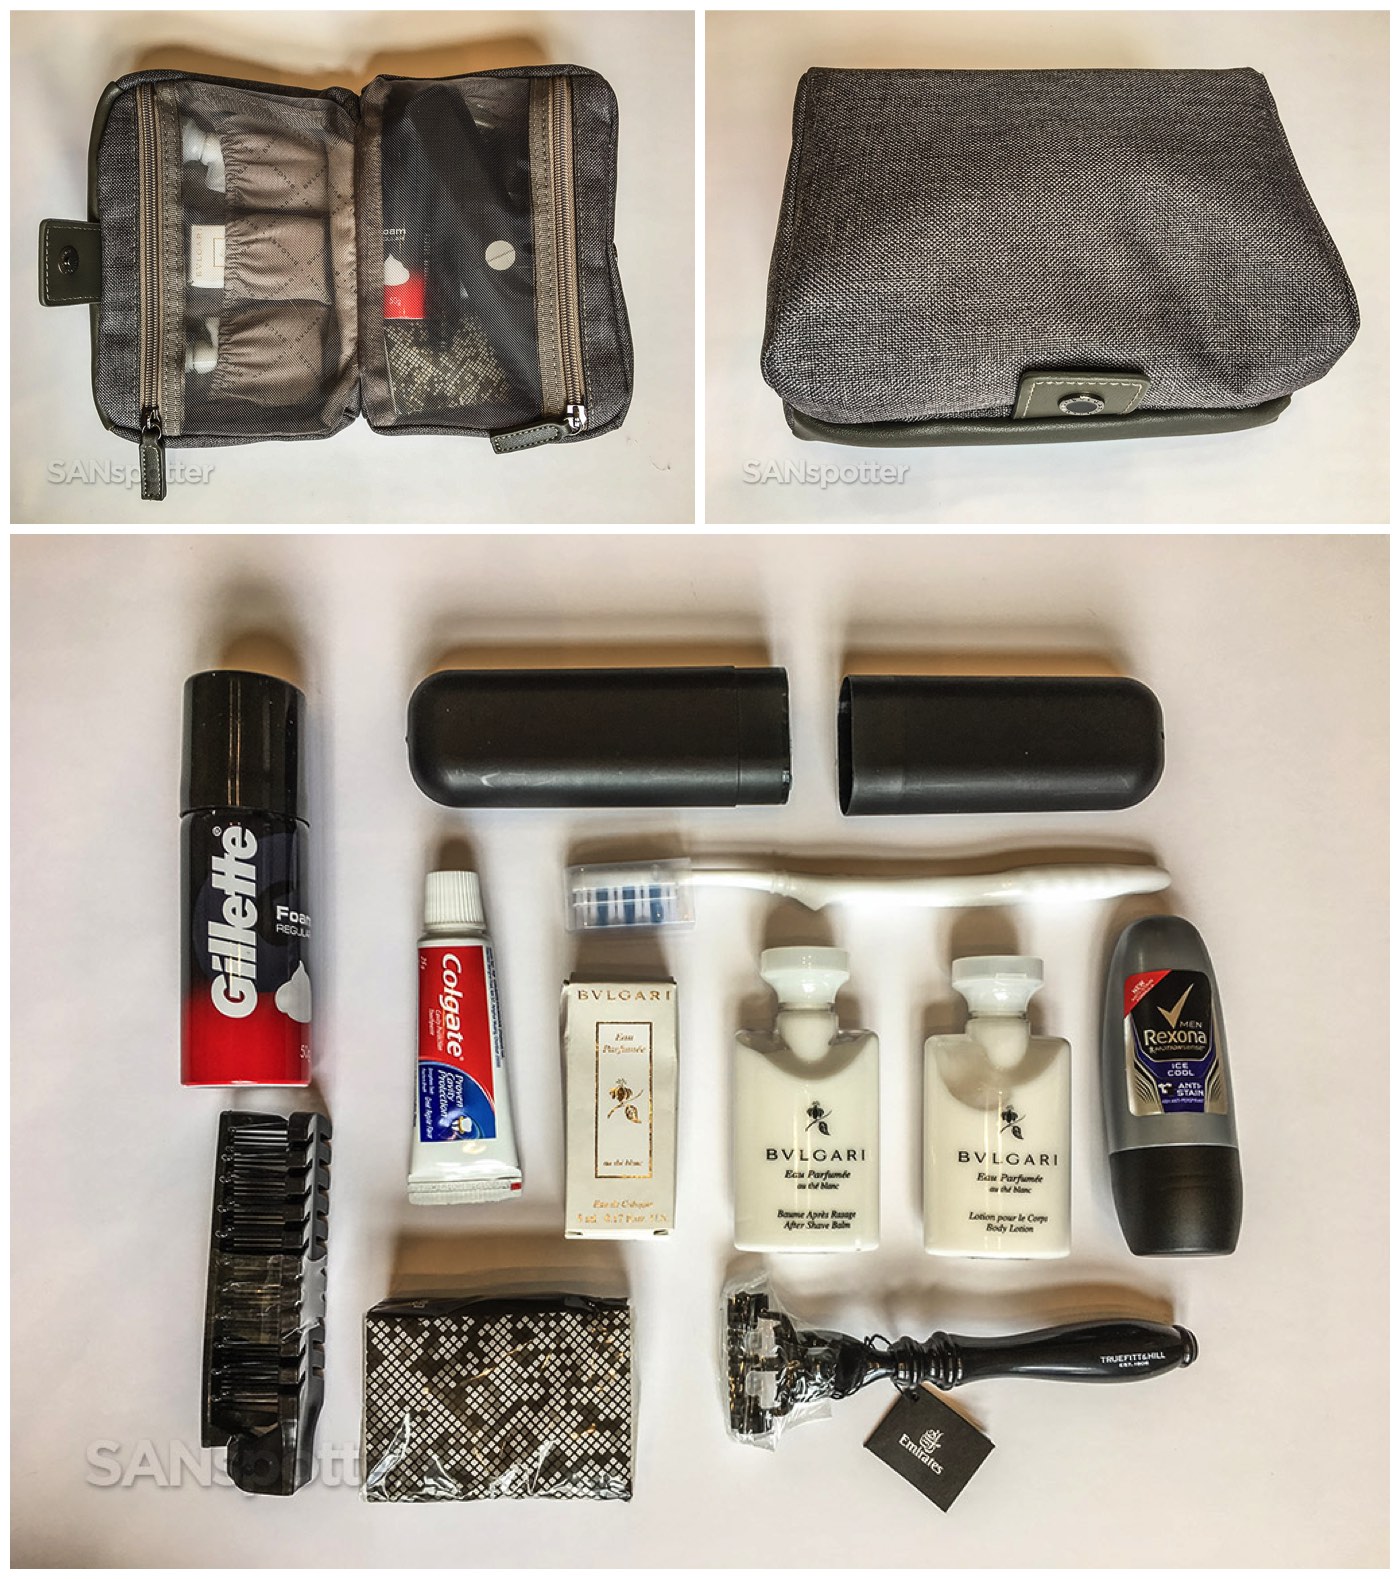 Emirates business class amenity kit contents